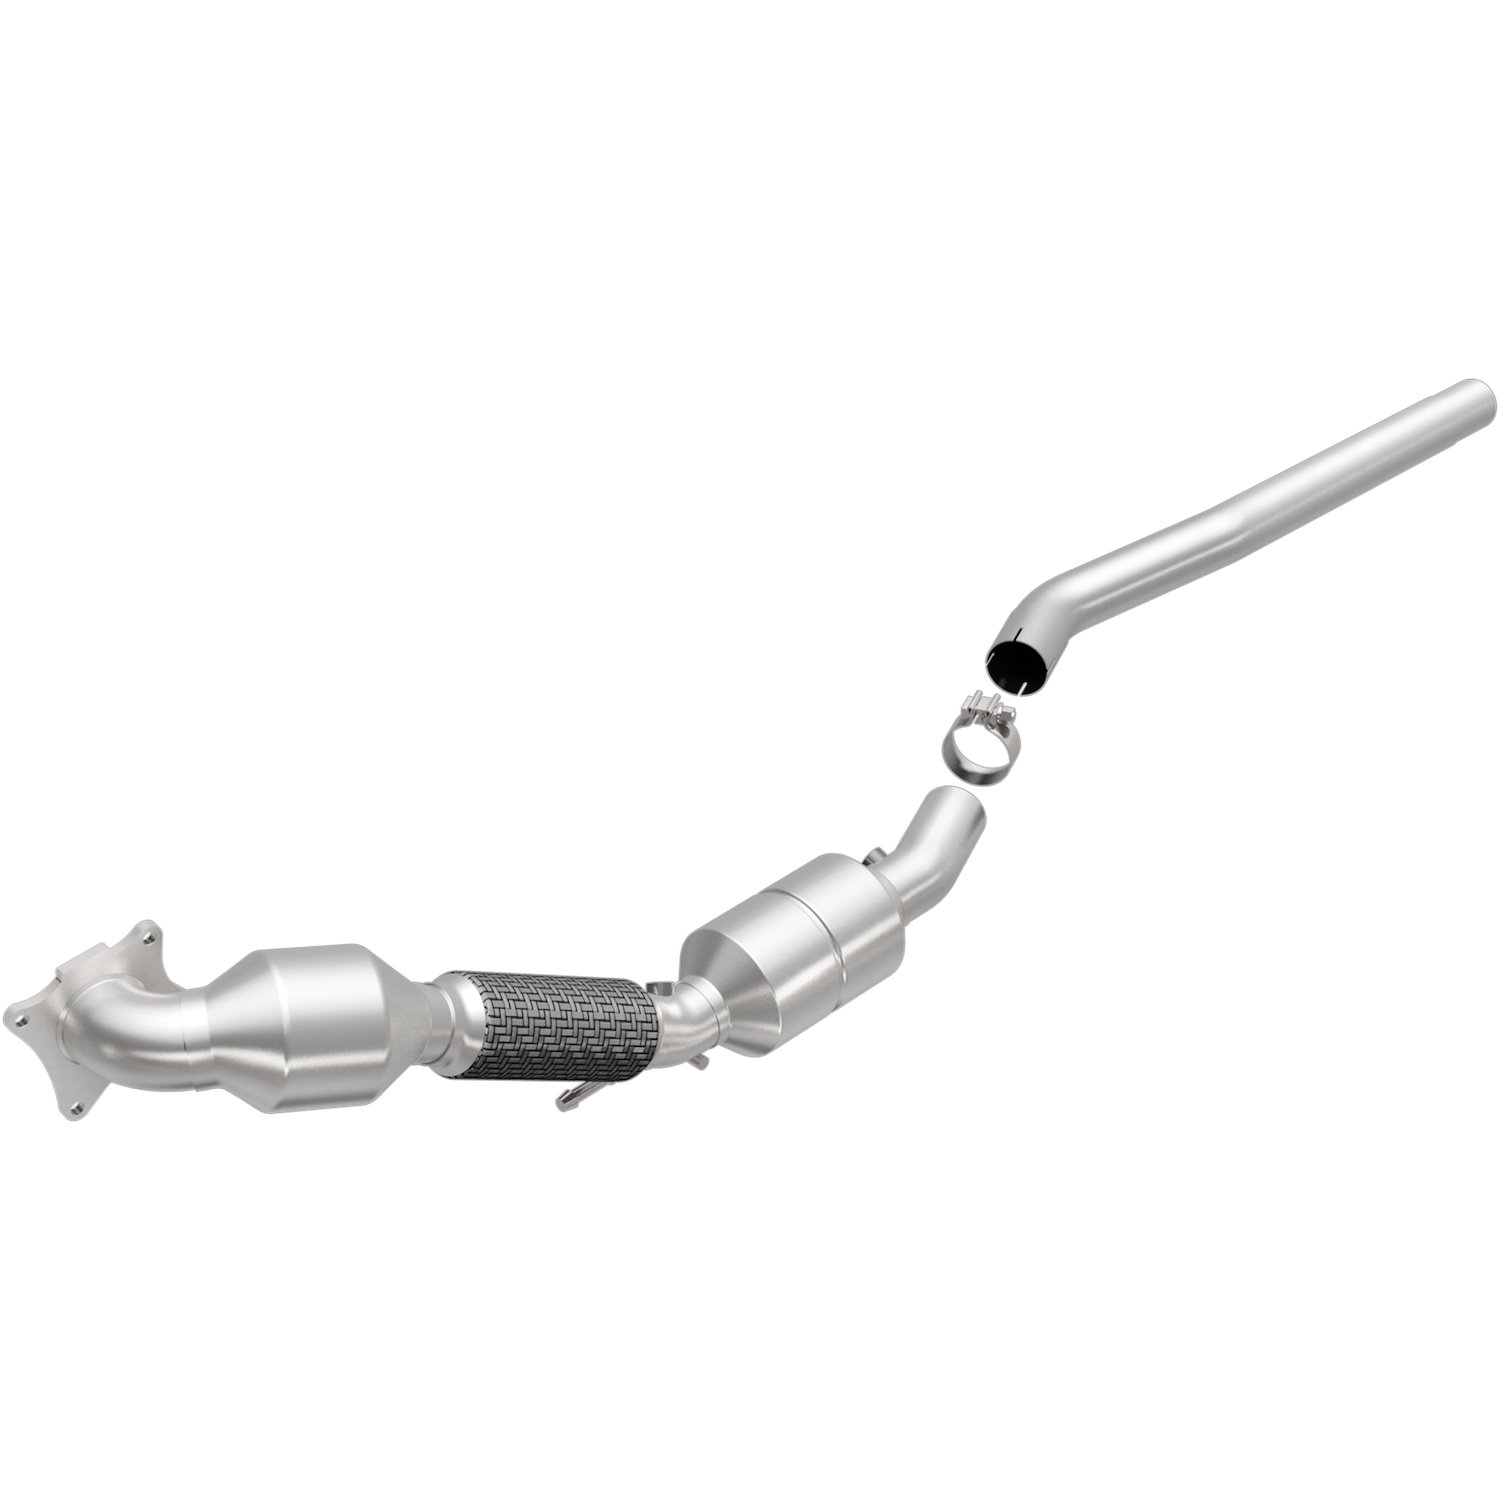 OEM Grade Federal / EPA Compliant Direct-Fit Catalytic Converter 51414